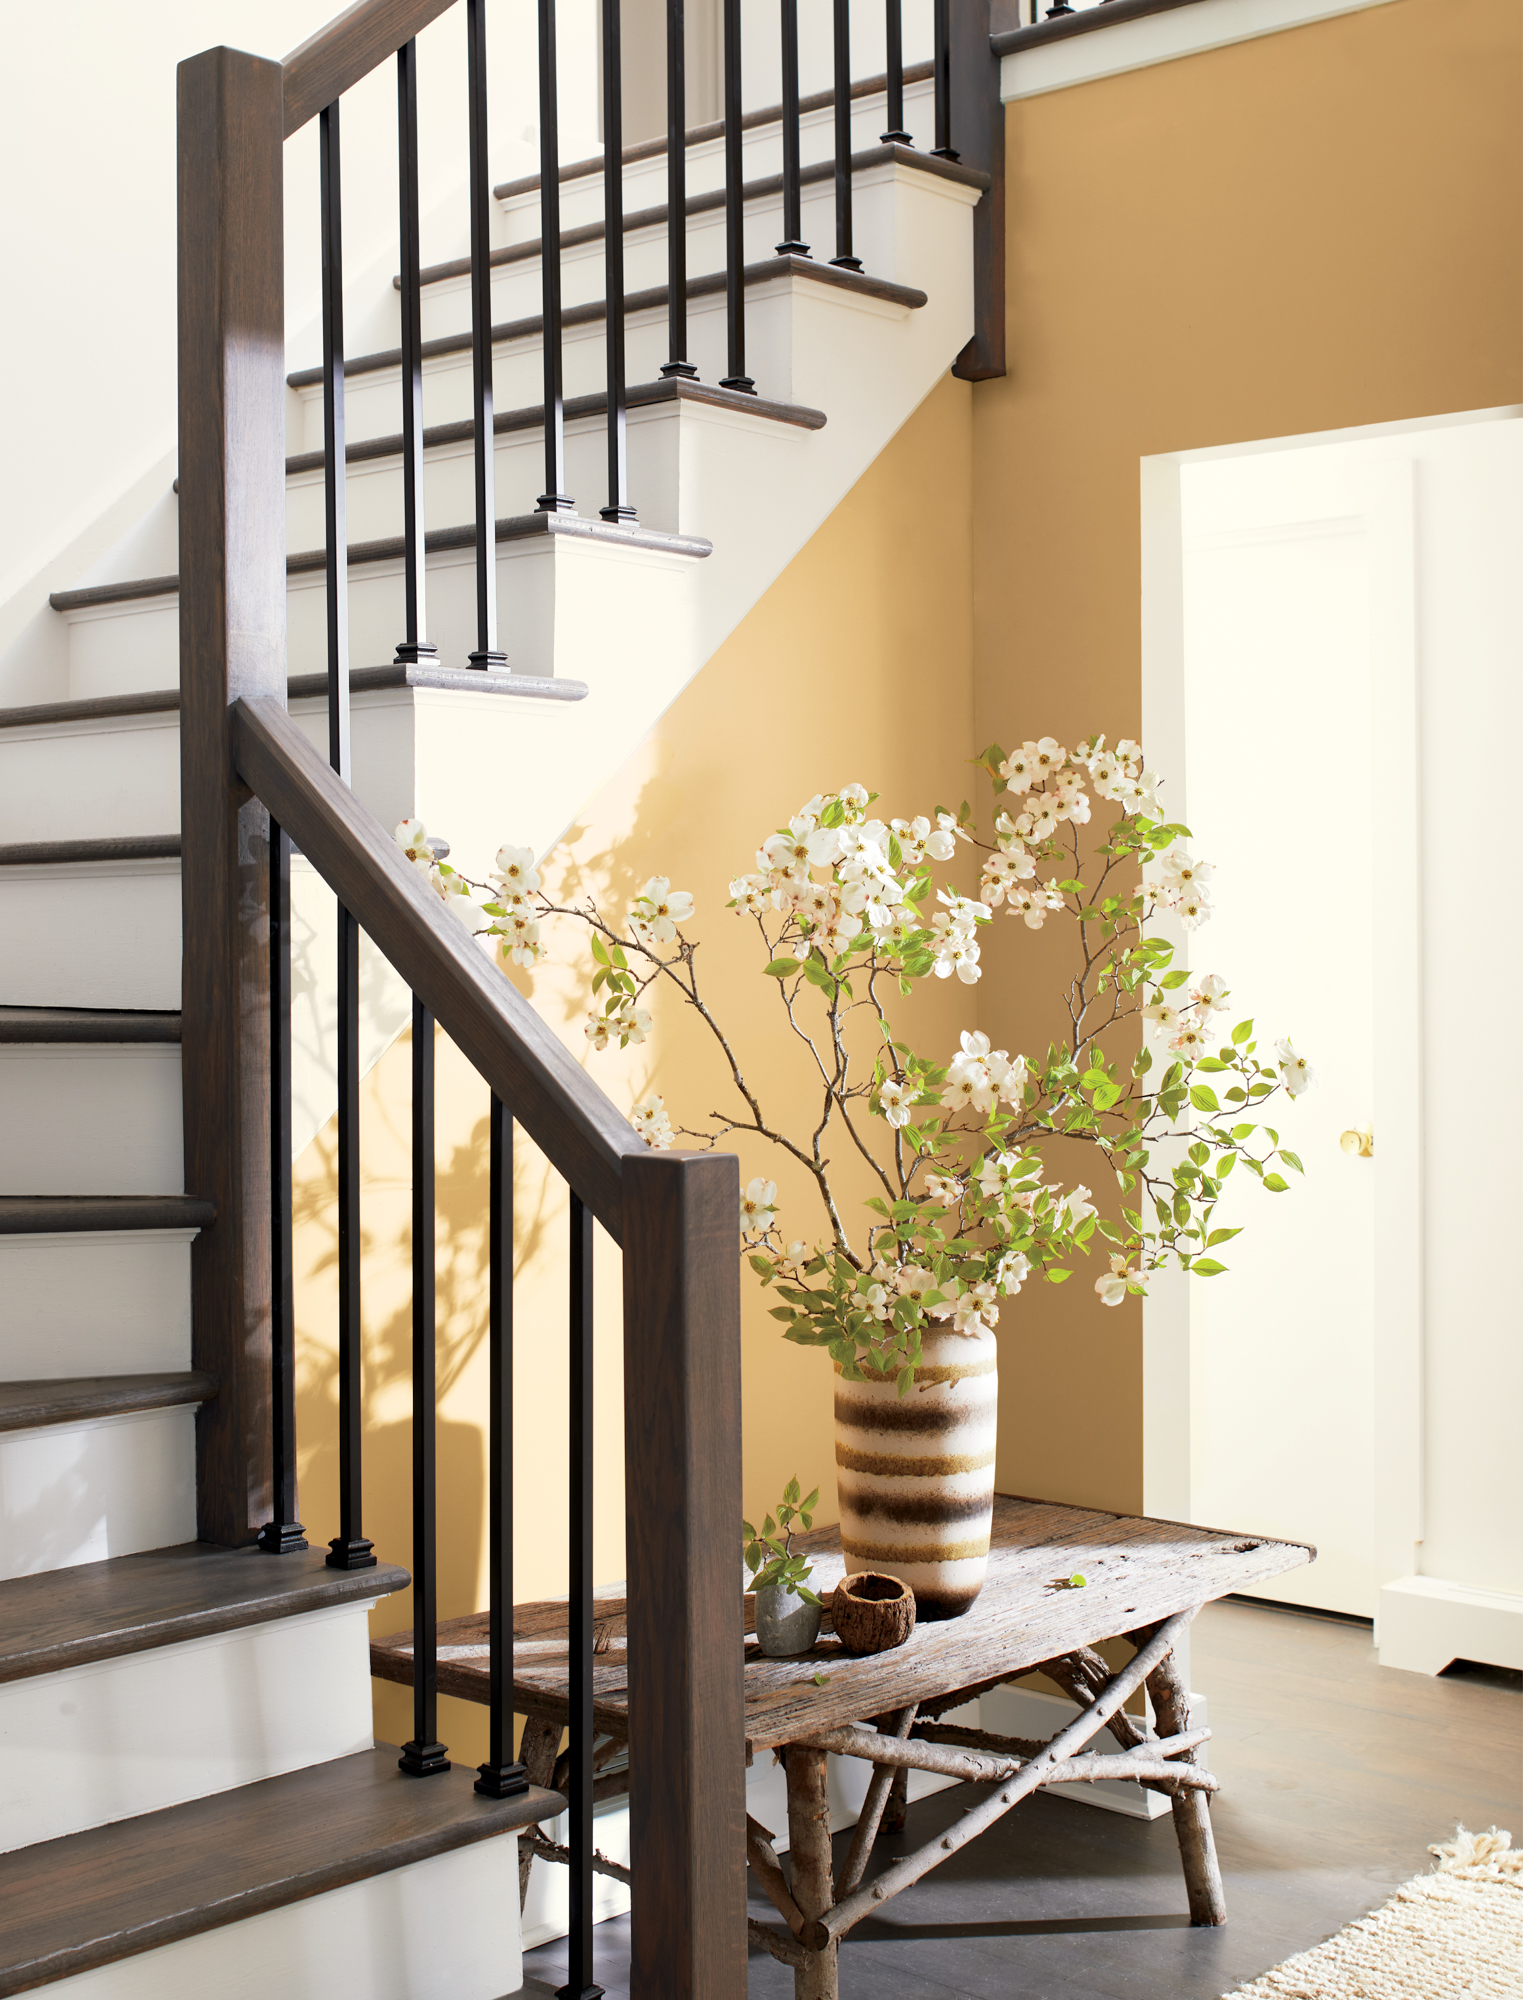 Benjamin Moore Colour of the Year